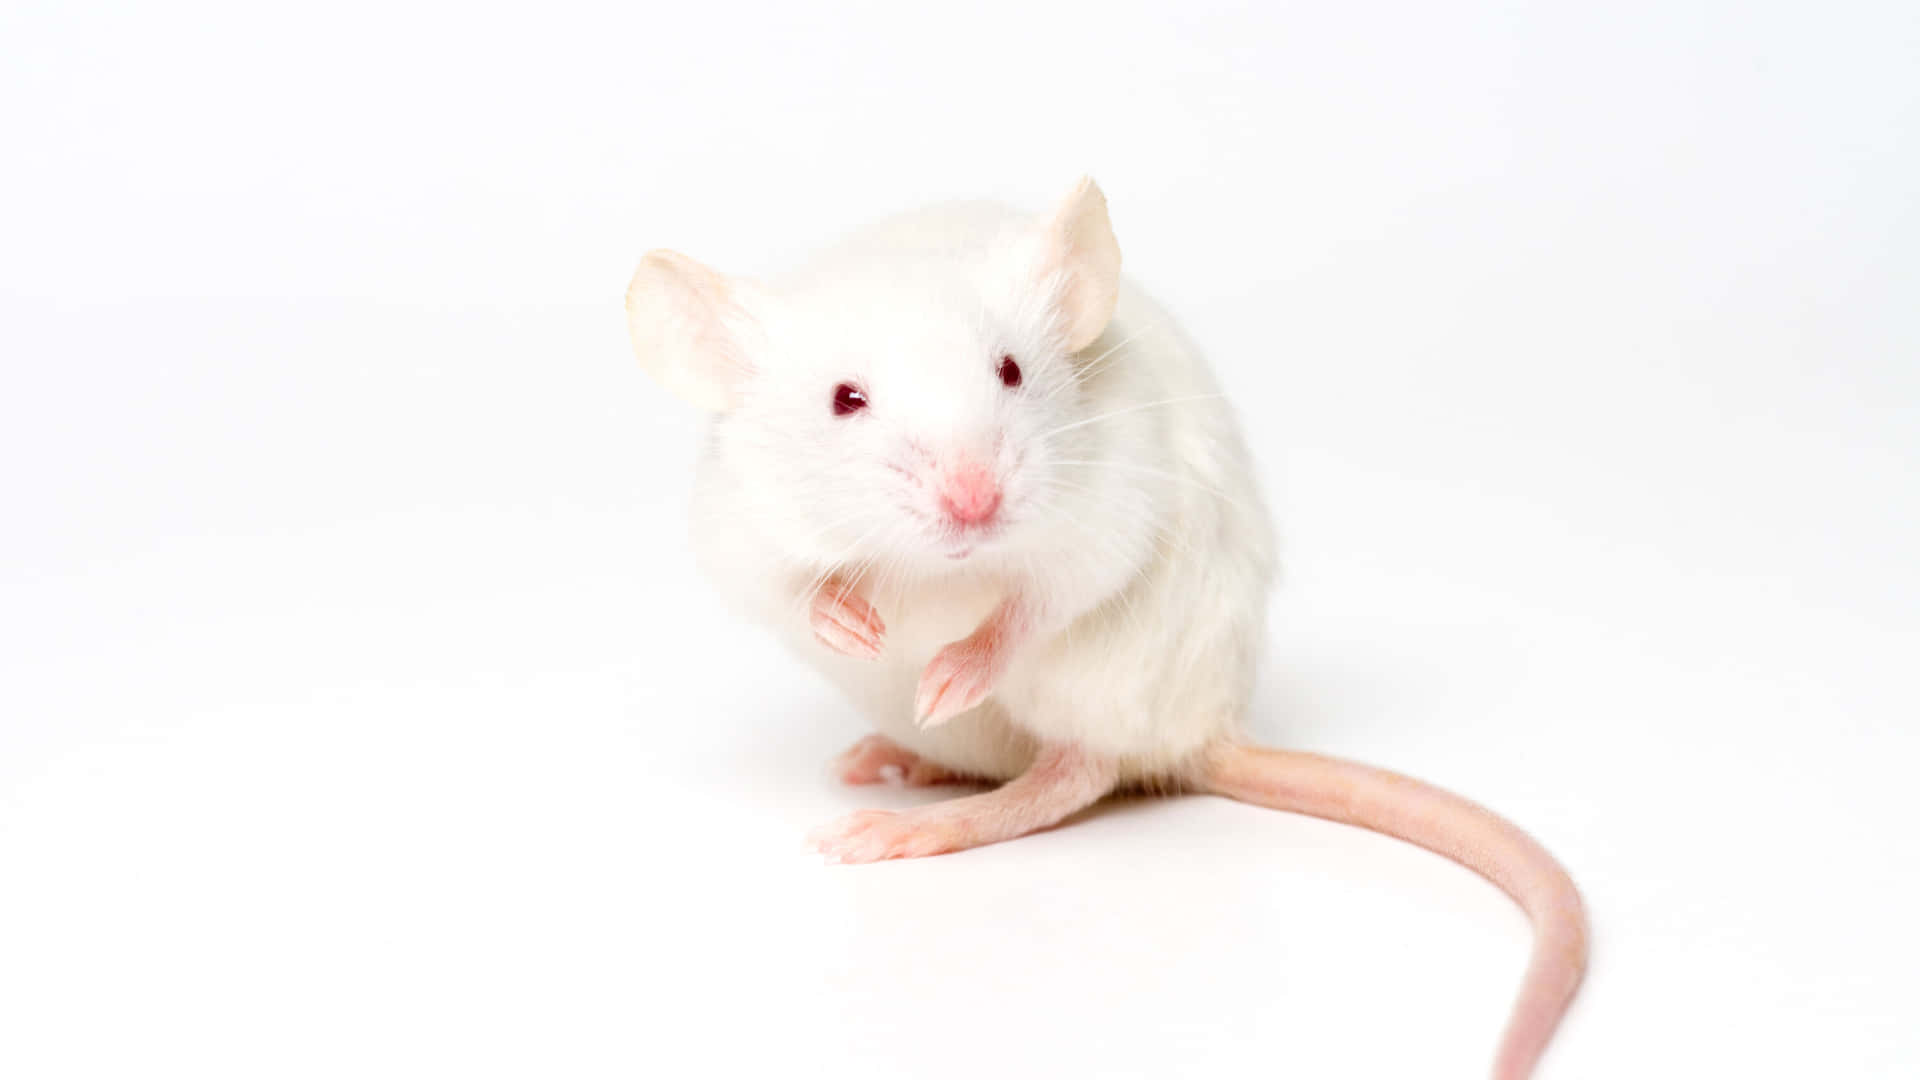 A White Rat Is Standing On A White Background